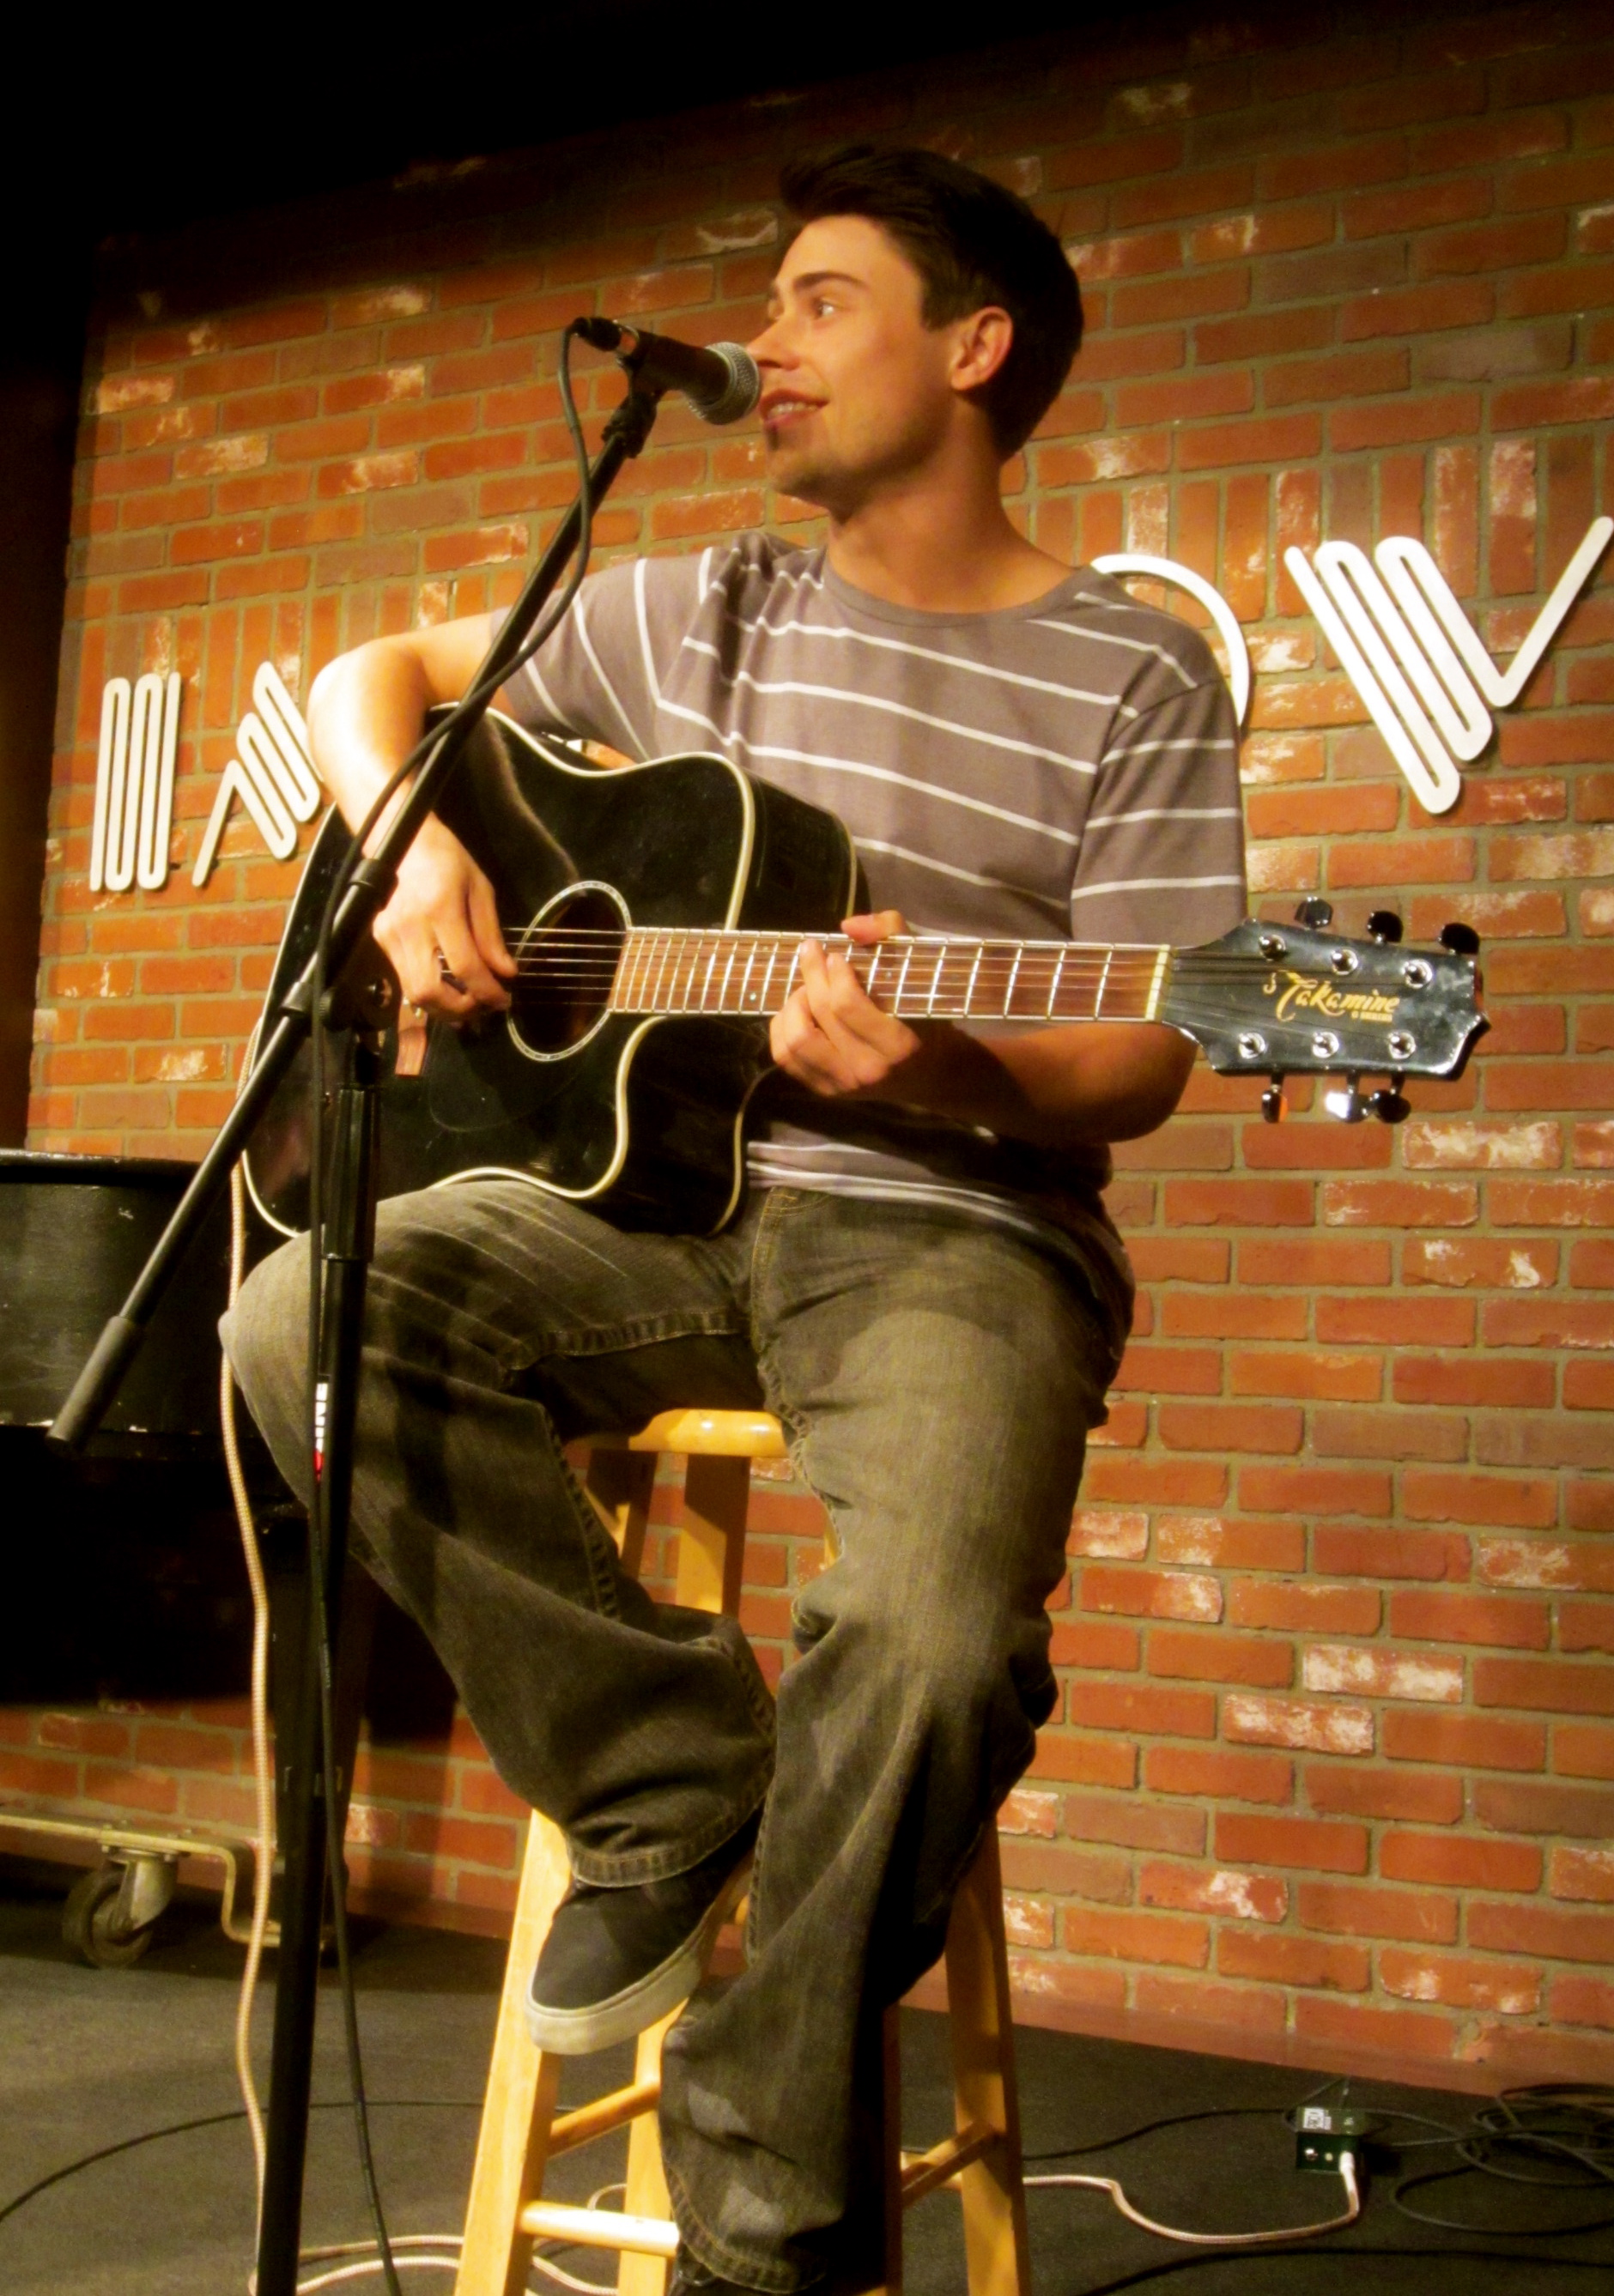 Performing at the HOLLYWOOD IMPROV on Melrose.